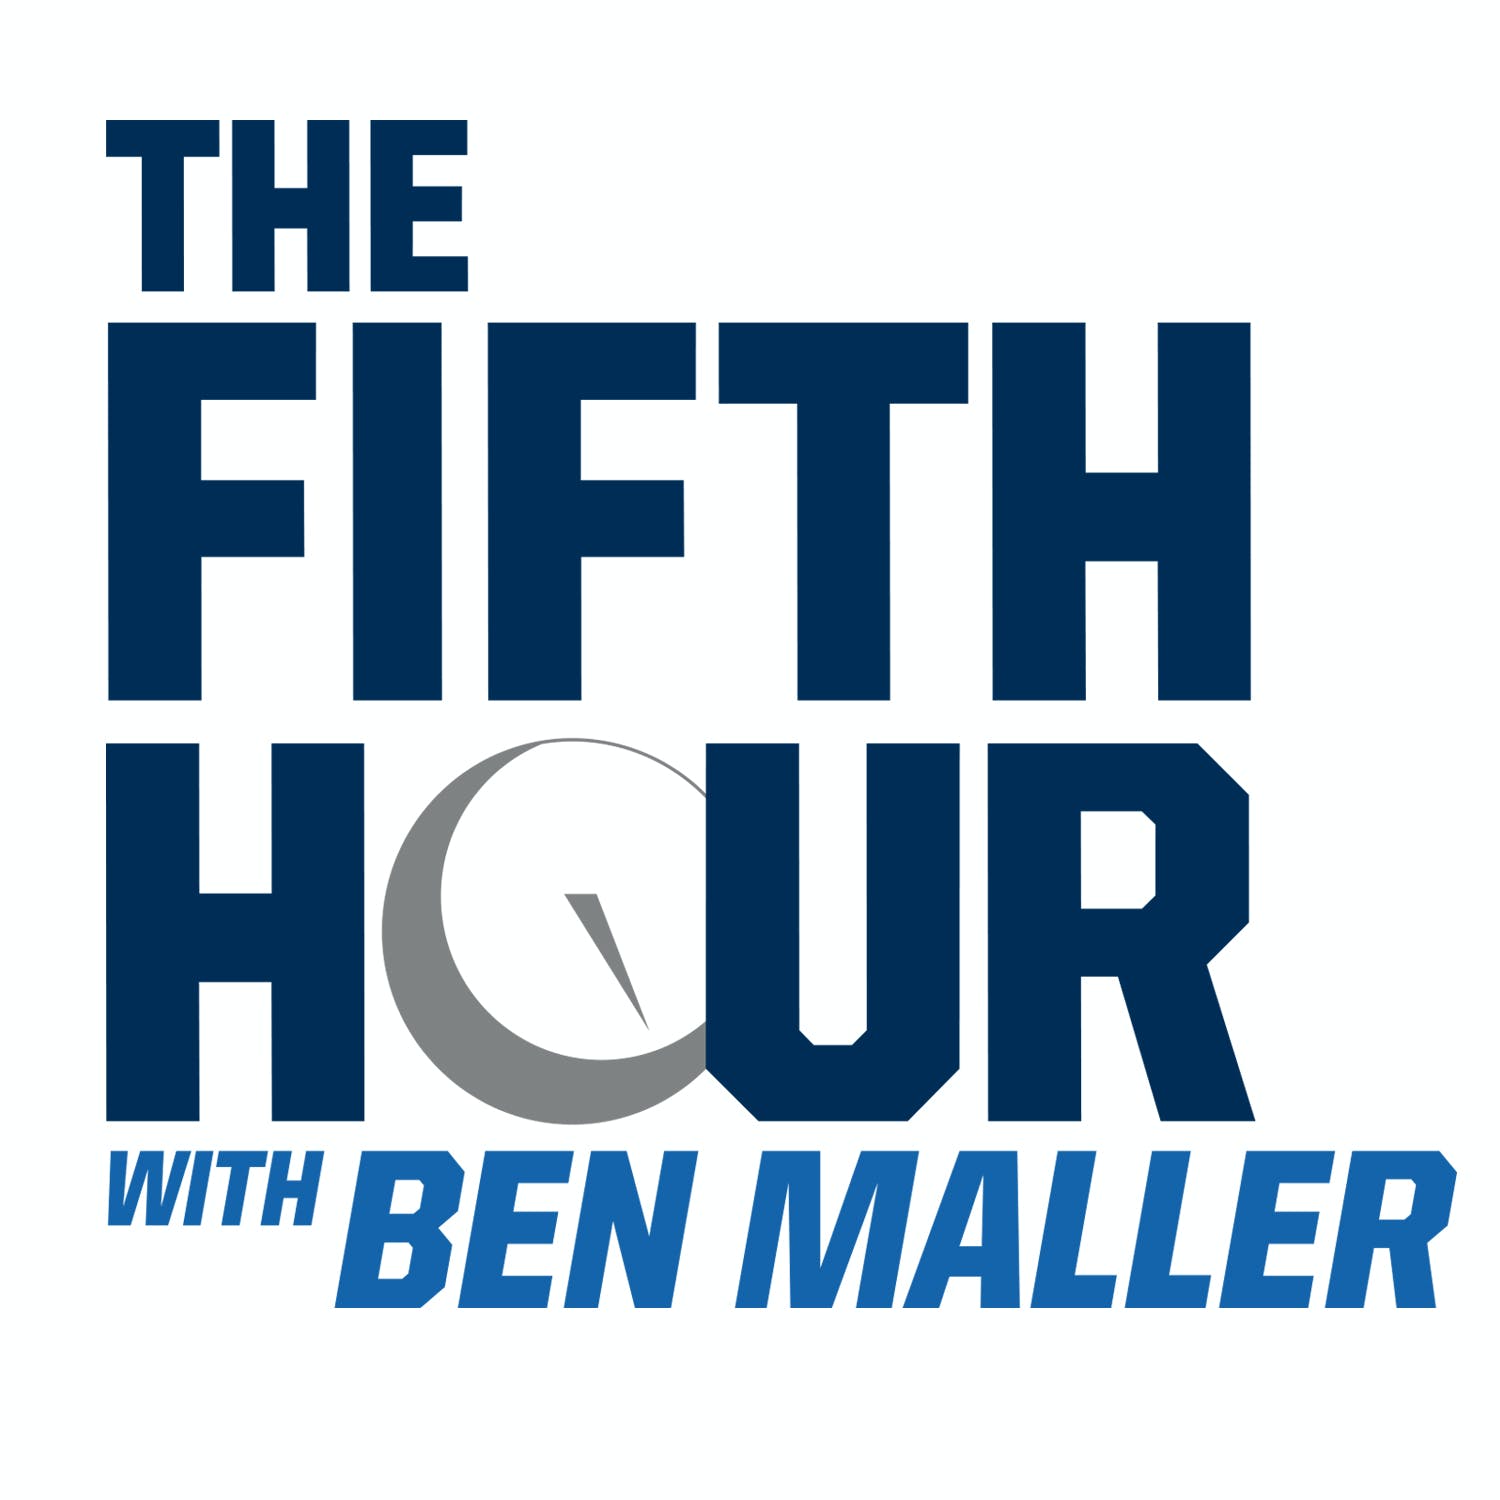 The Fifth Hour: "Wrong Kind of Pot" Mail Bag